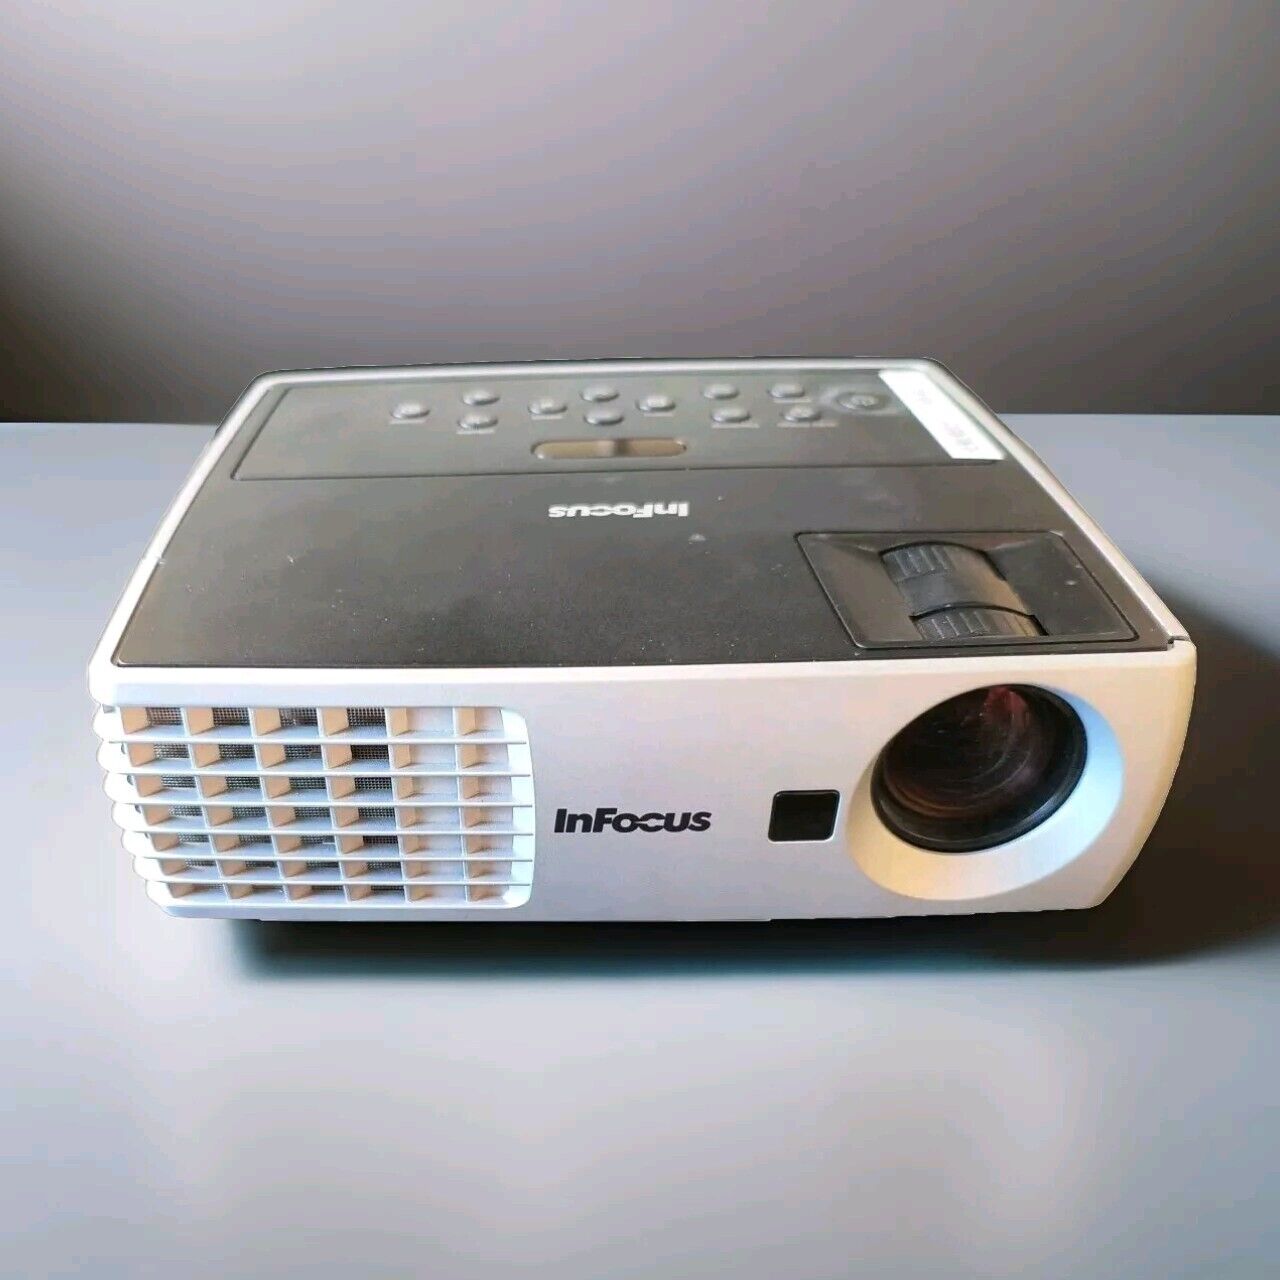 InFocus Projector IN1100 Model: W1100 w Manuals, cables, carrying case